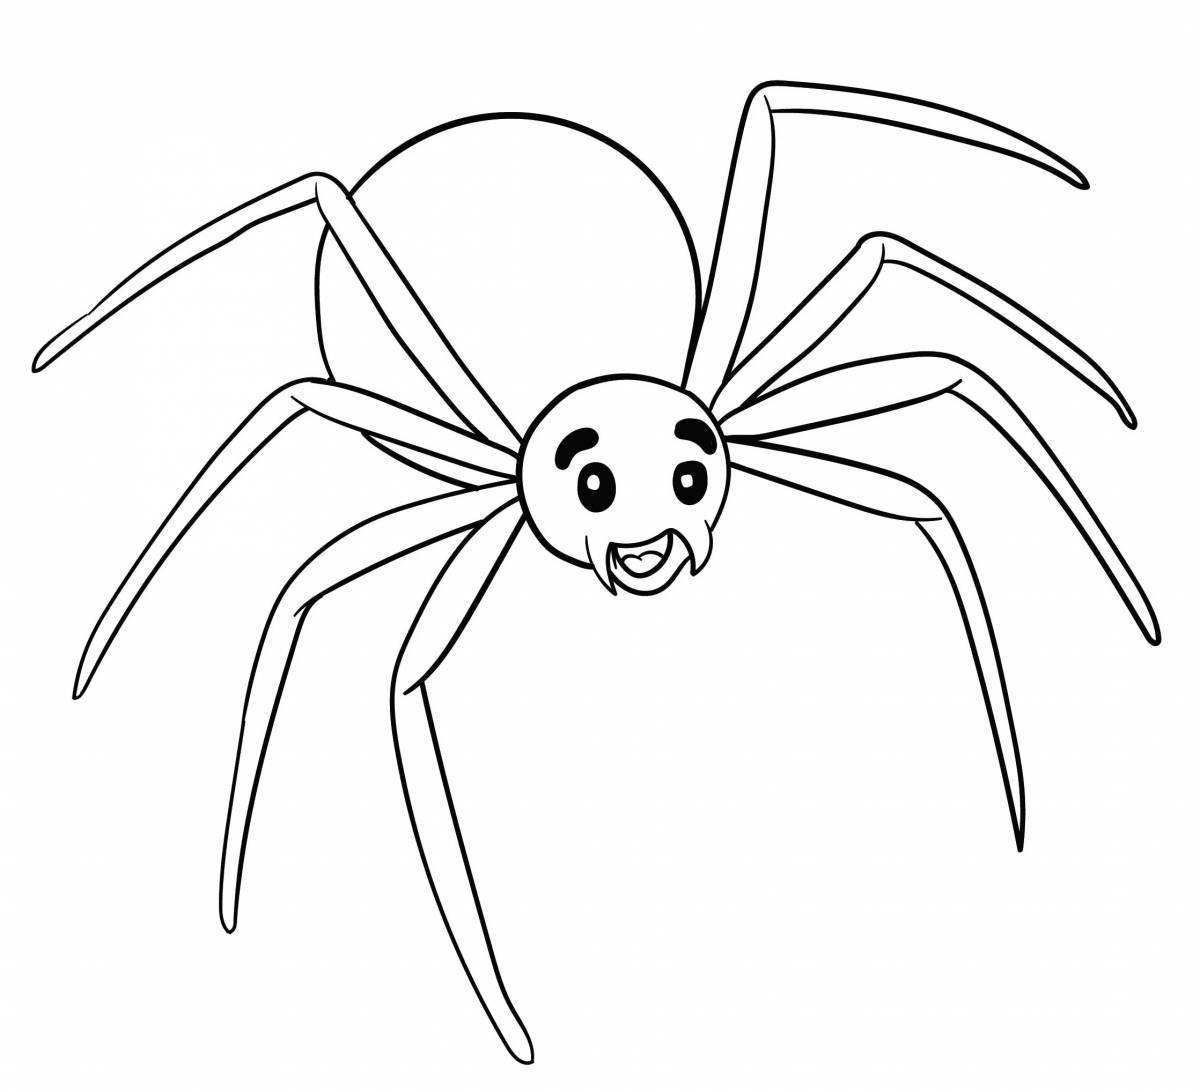 Disgusting spider coloring book